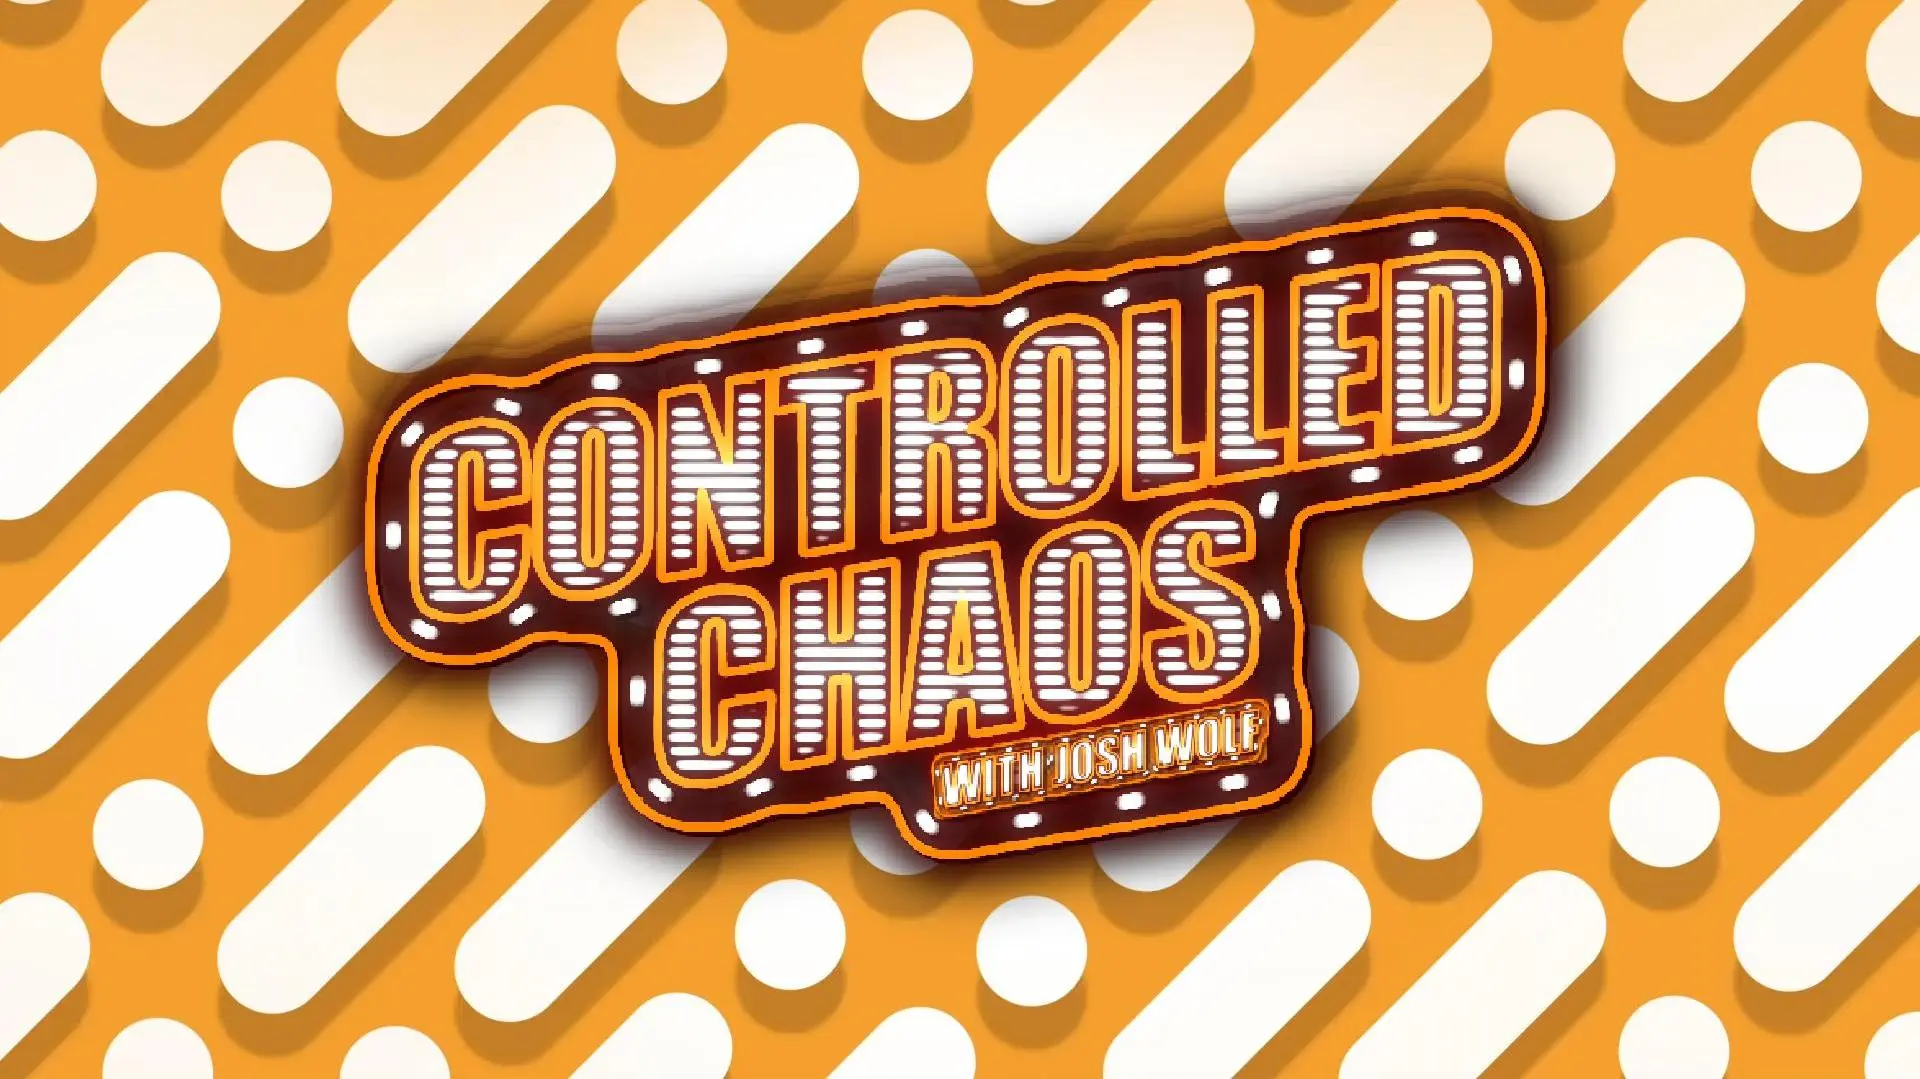 Controlled Chaos_peliplat